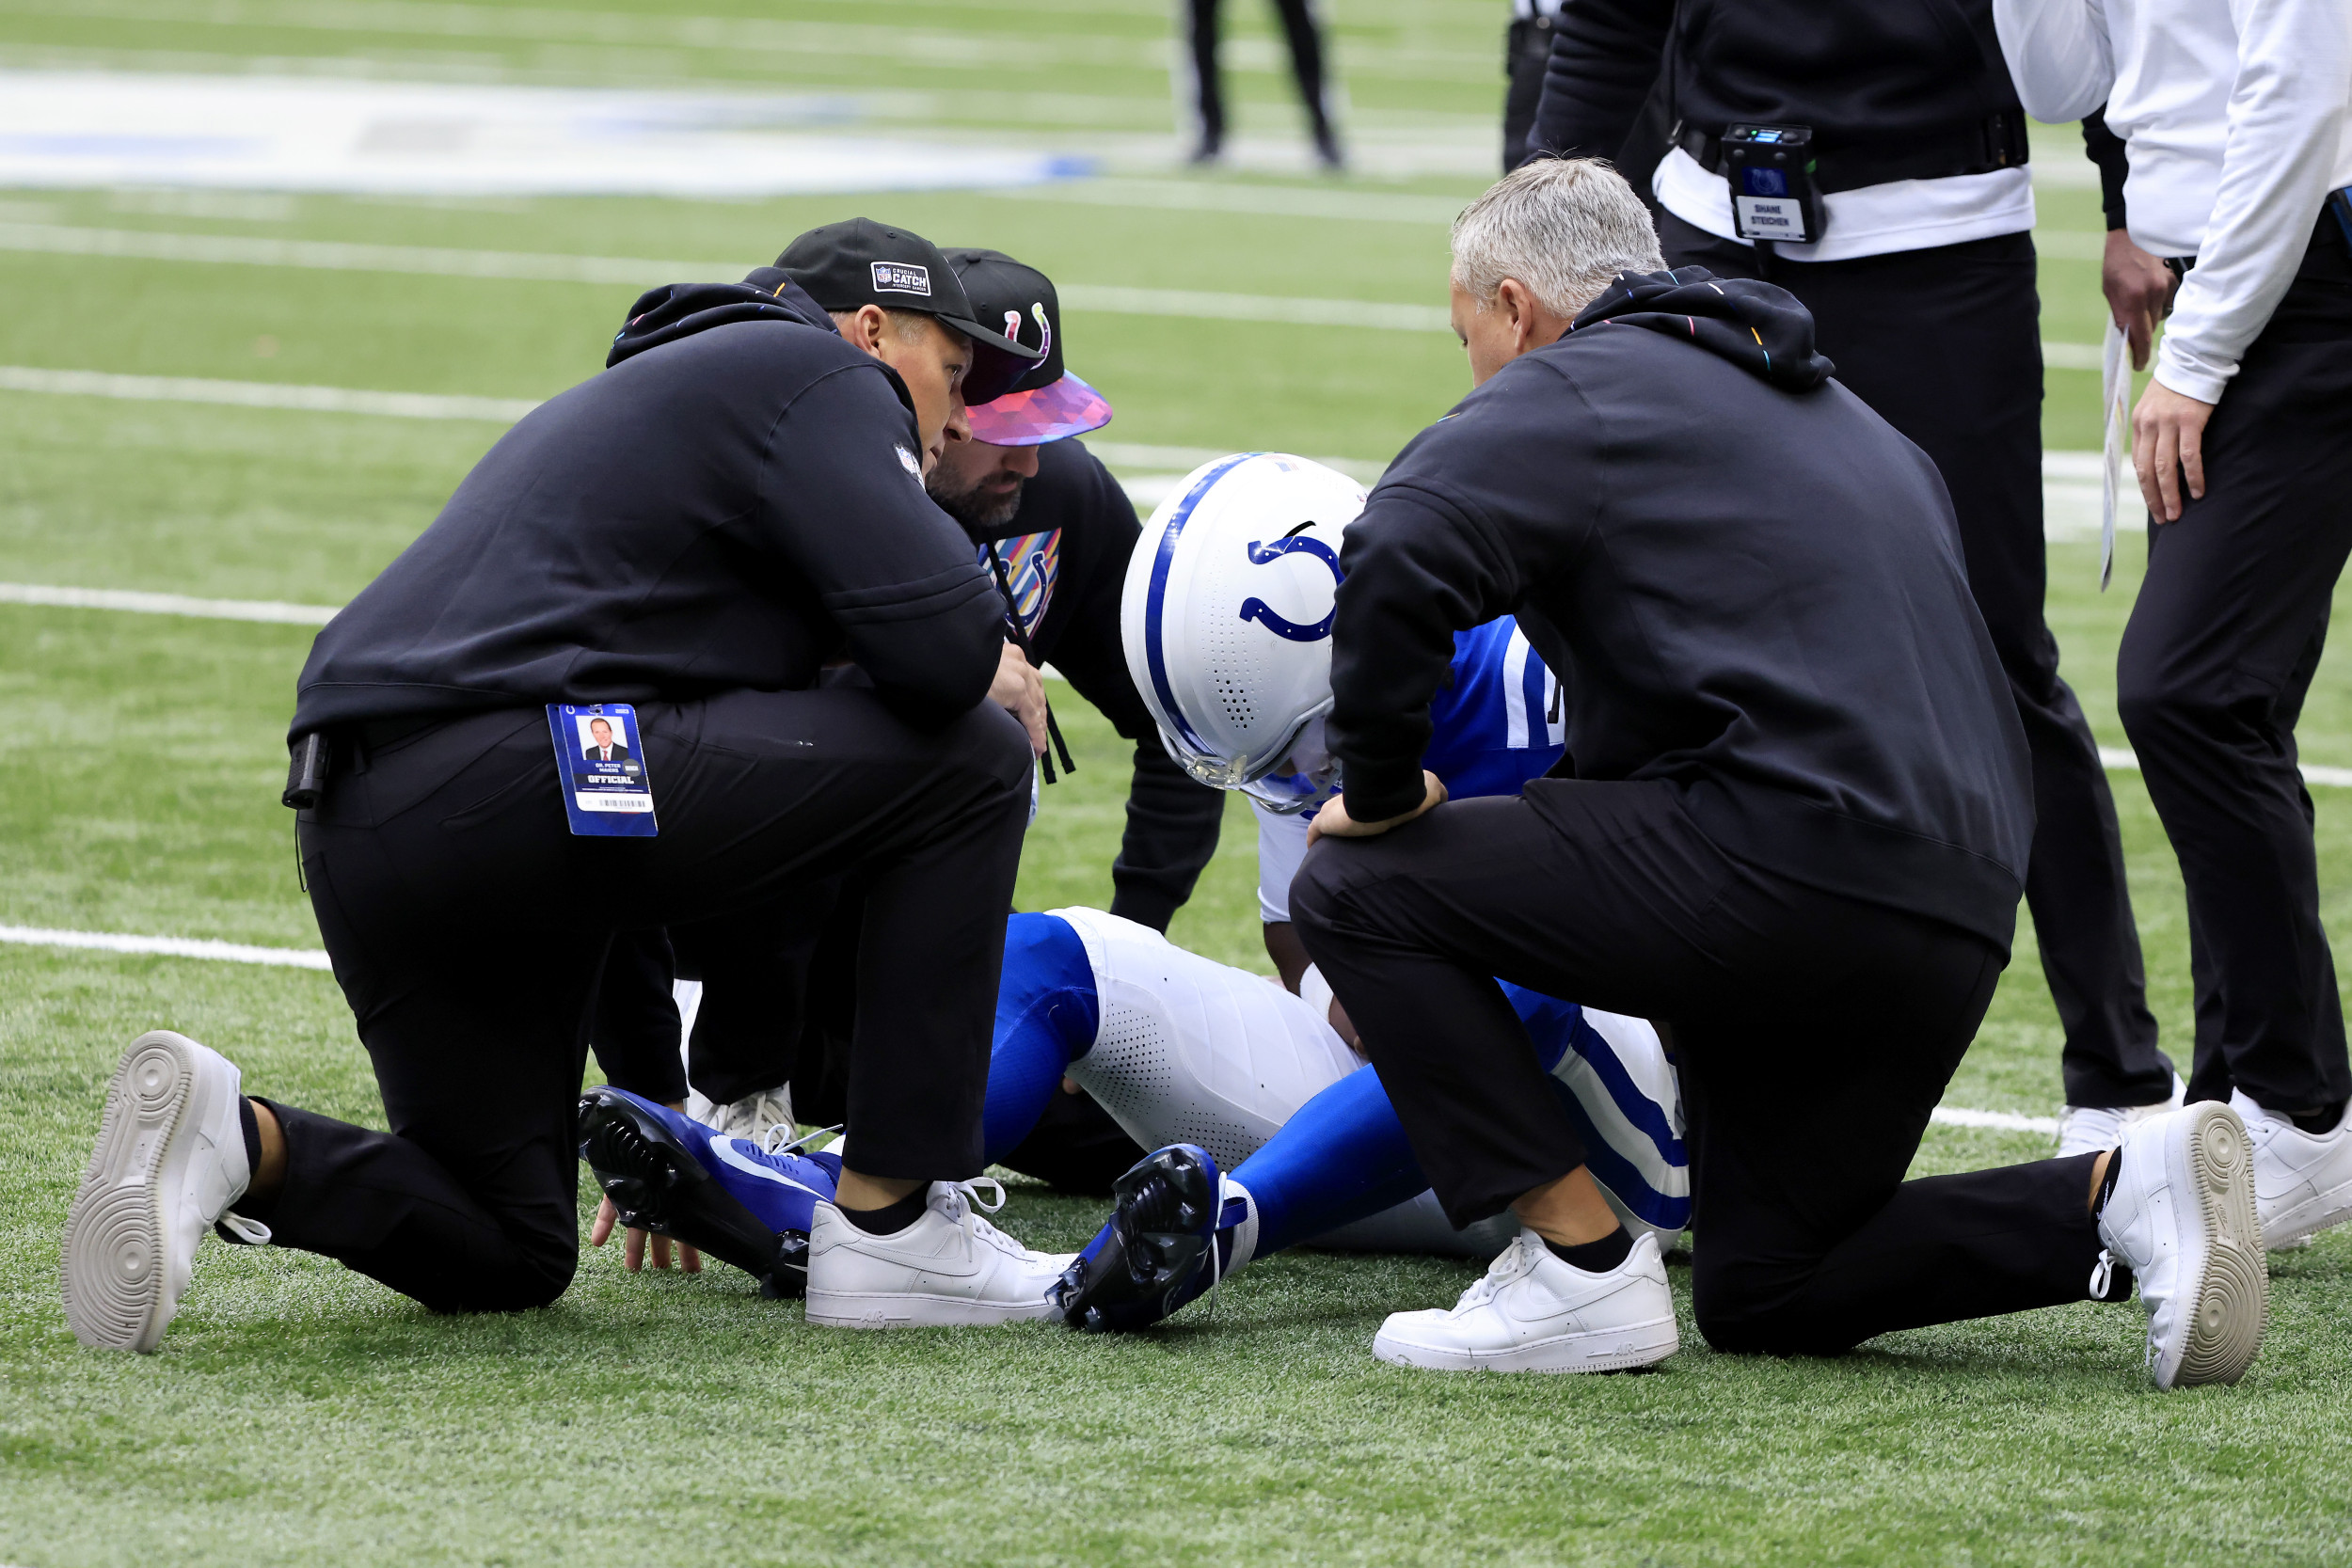 Anthony Richardson Injury: What We Know About the Colts QB's Status ...